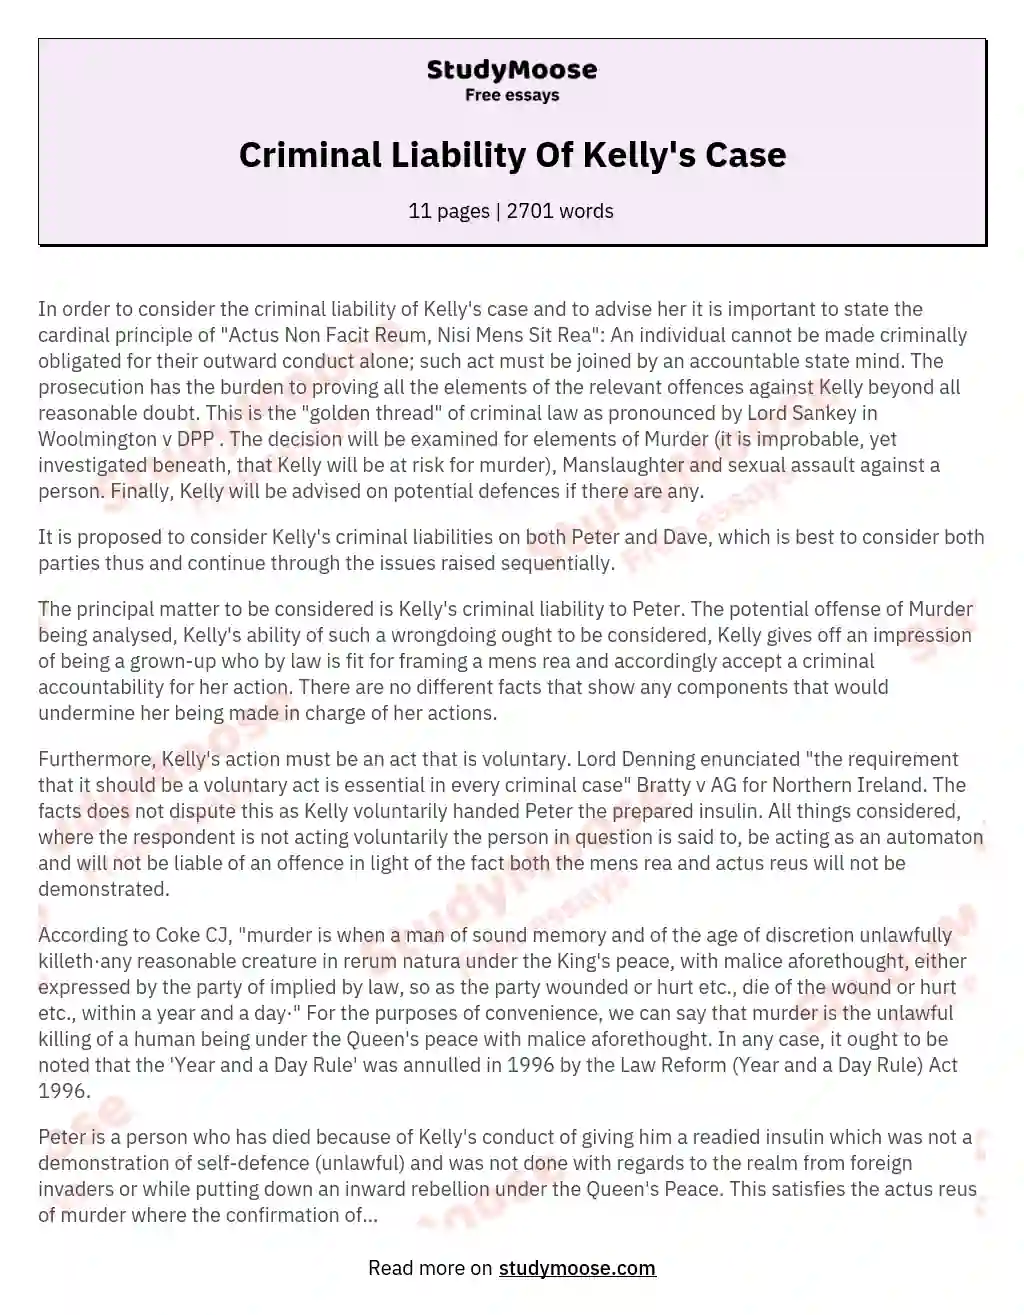 Criminal Liability Of Kelly's Case